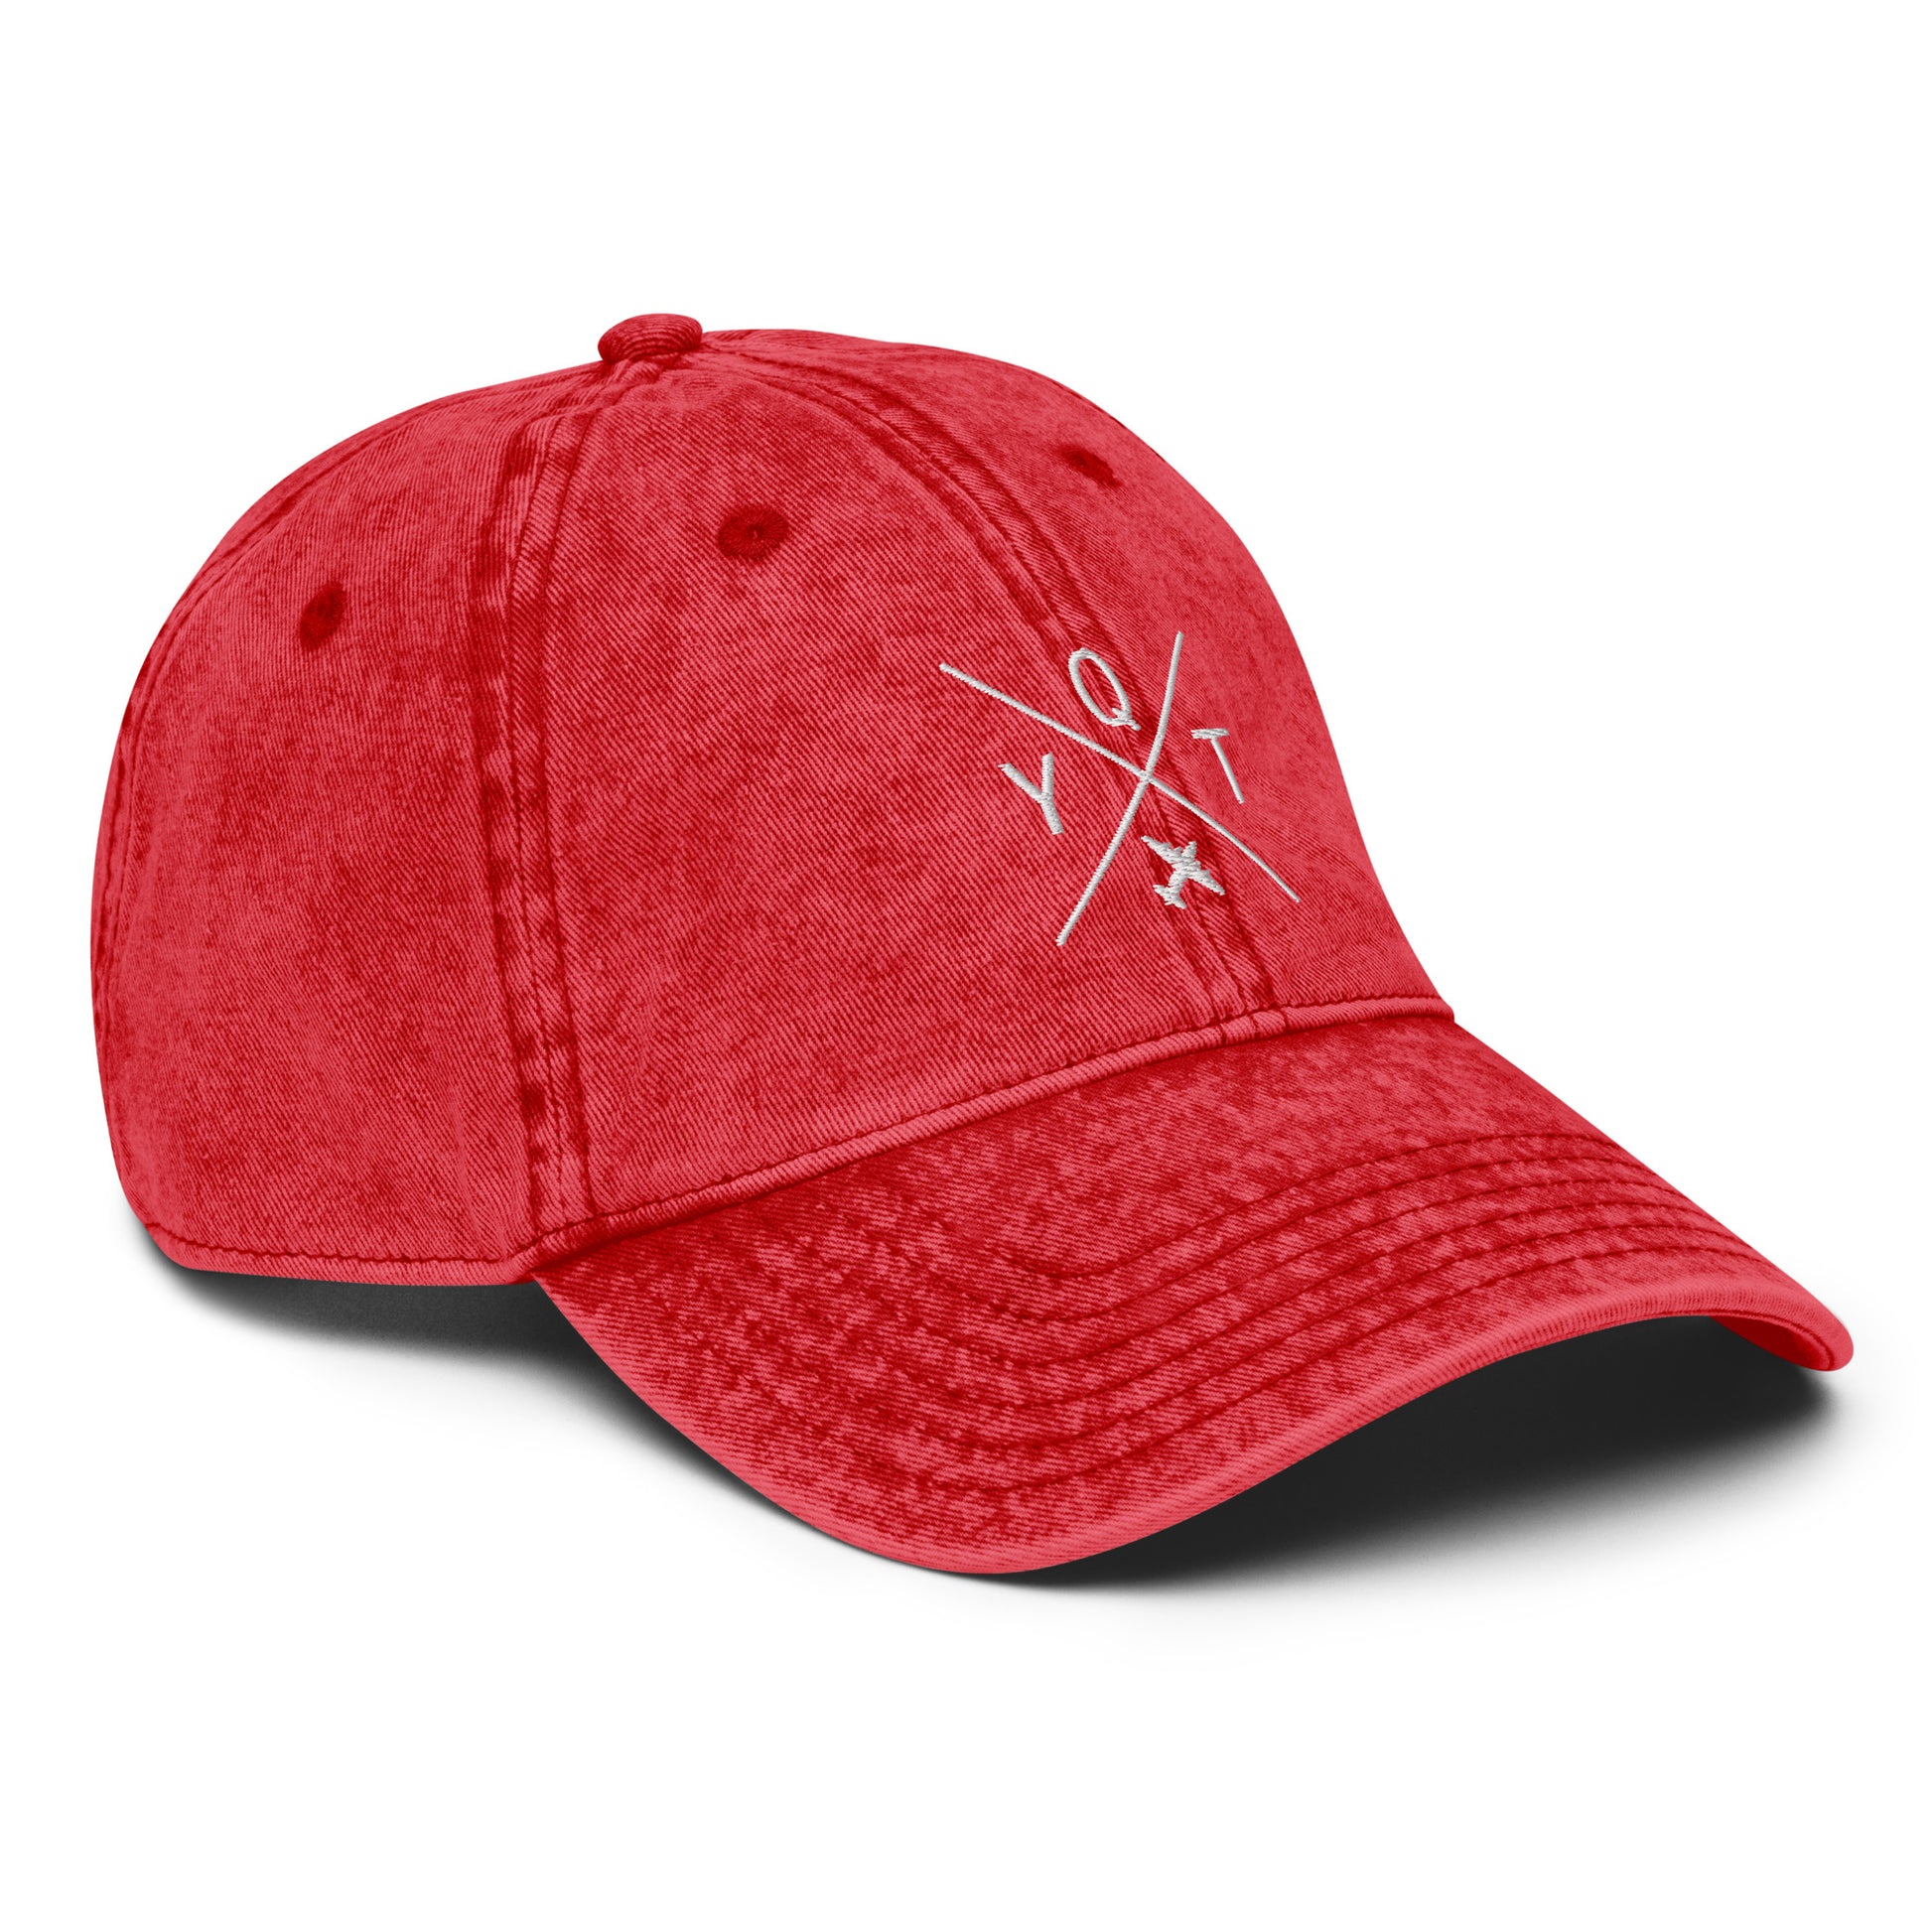 Crossed-X Cotton Twill Cap - White • YQT Thunder Bay • YHM Designs - Image 26